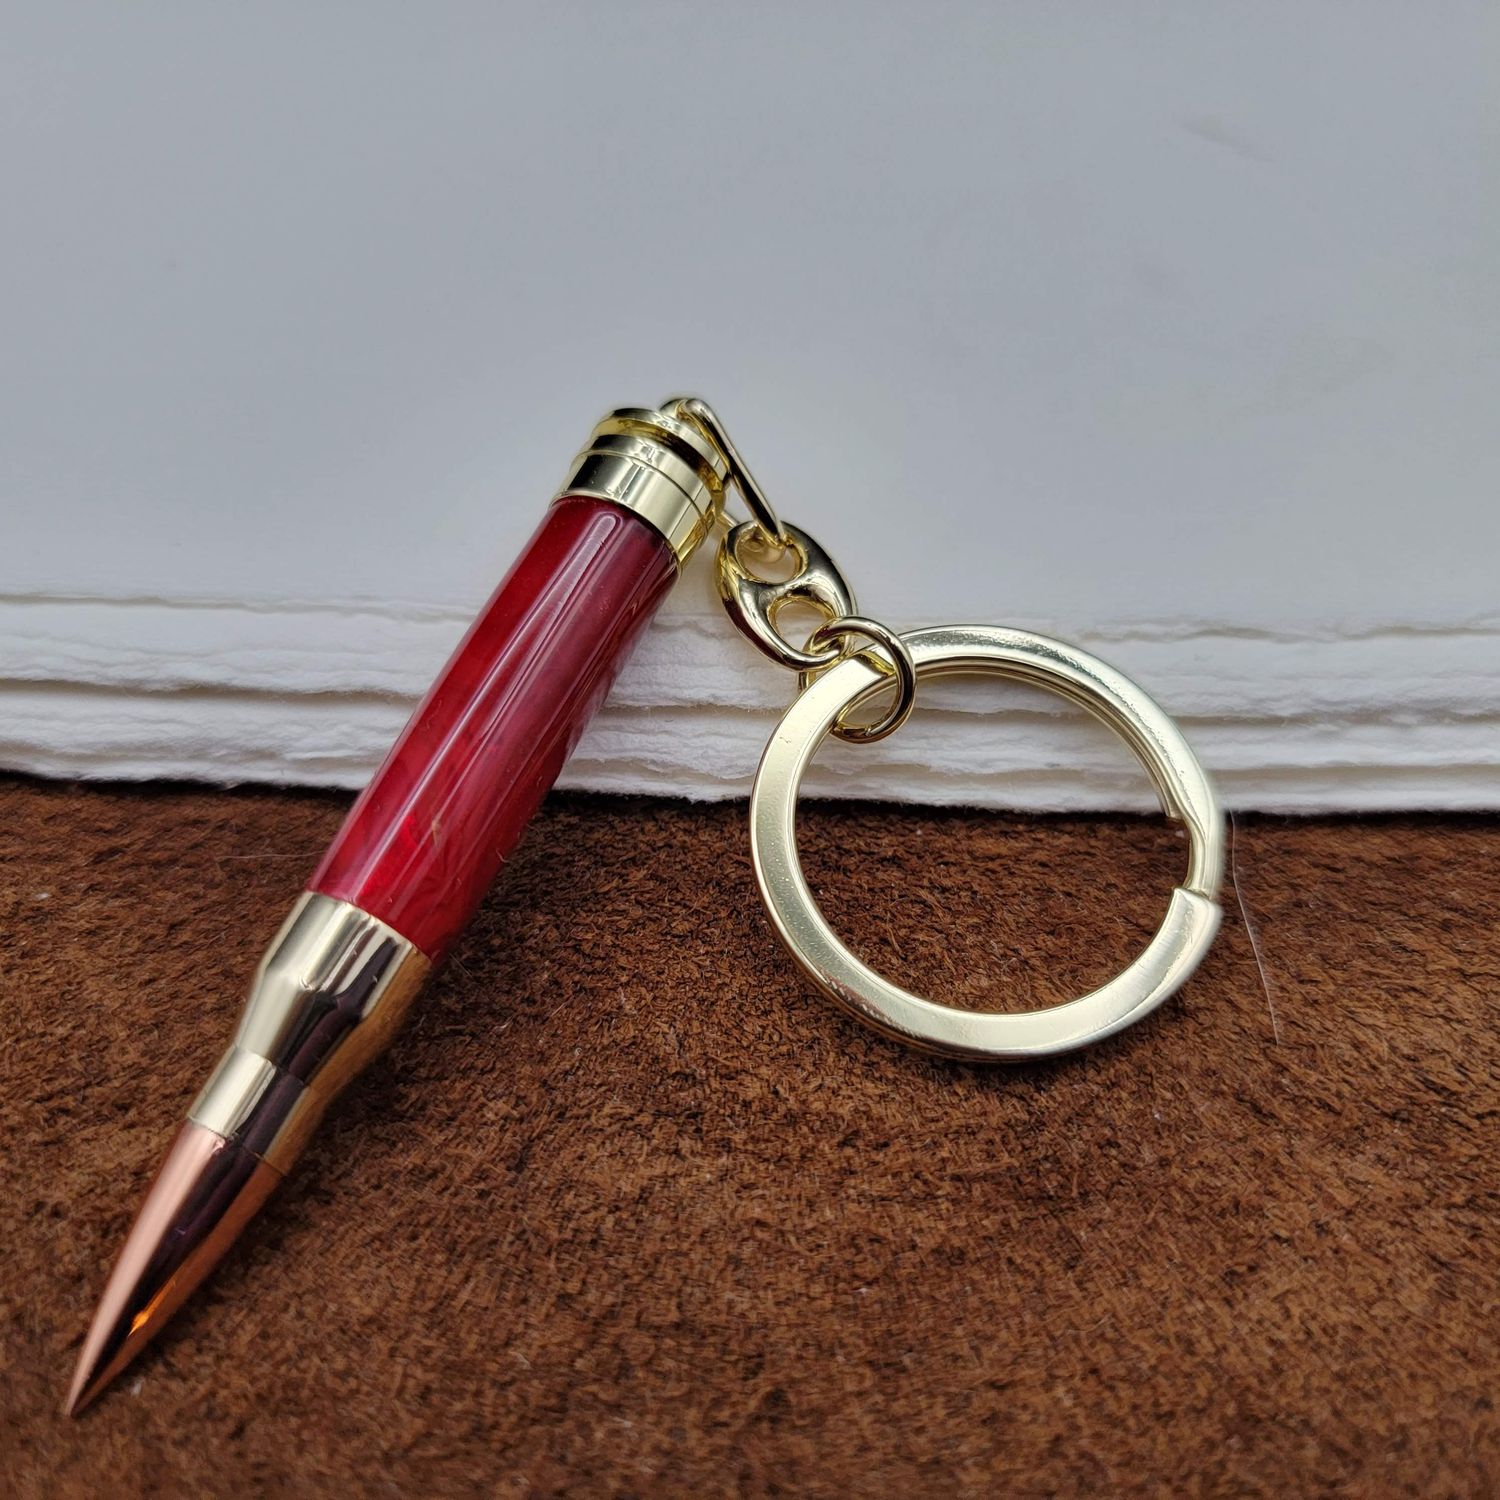 Red Bullet Key Chain with Gold Finish